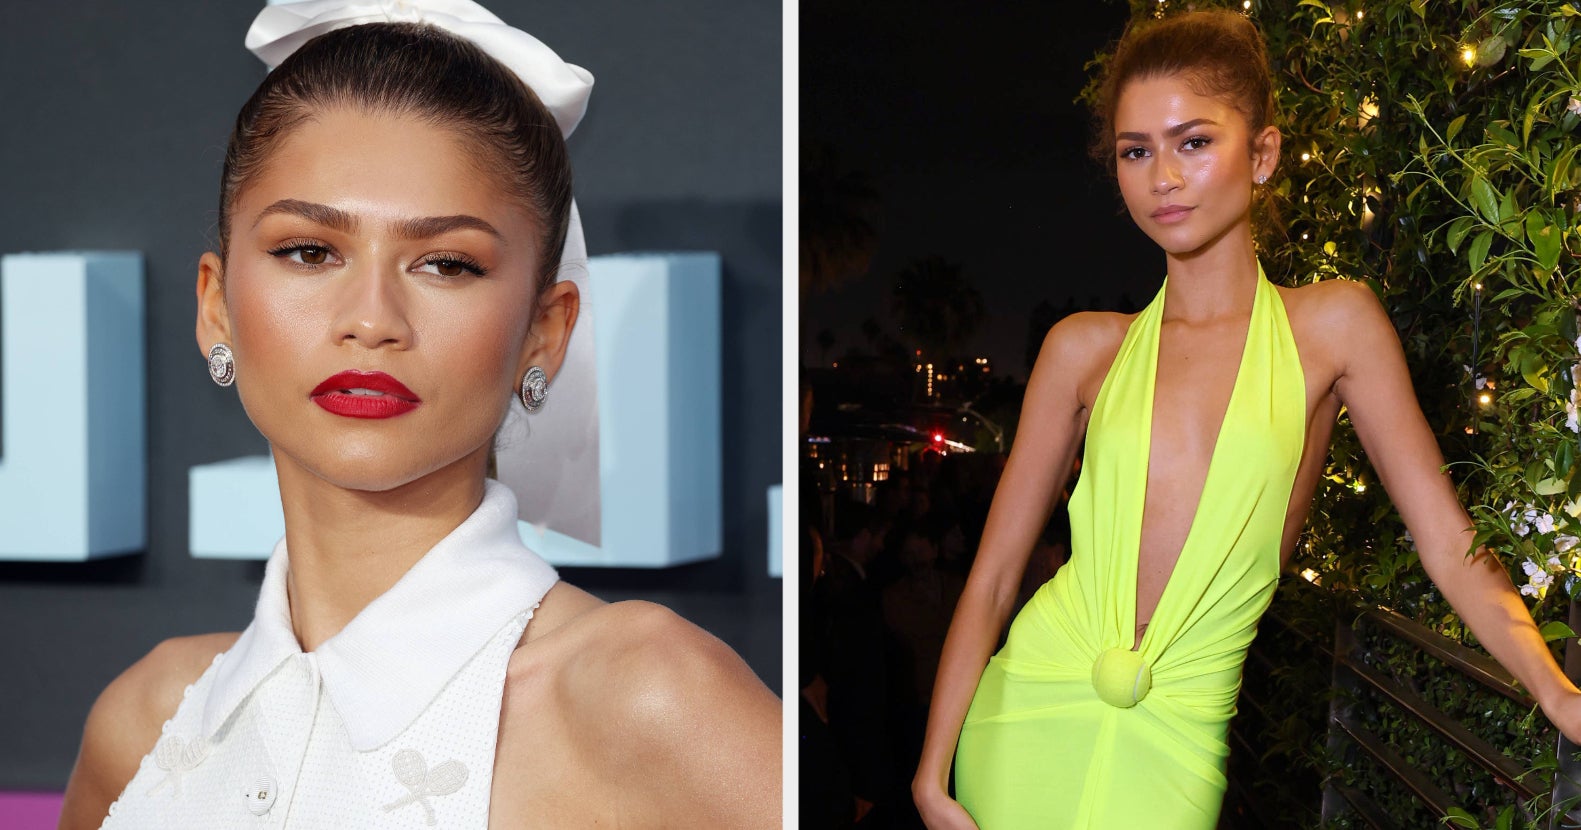 Zendaya's Tennis-Inspired Press Tour: A Series of Stunning Outfits Paying Homage to Her New Film Challengers